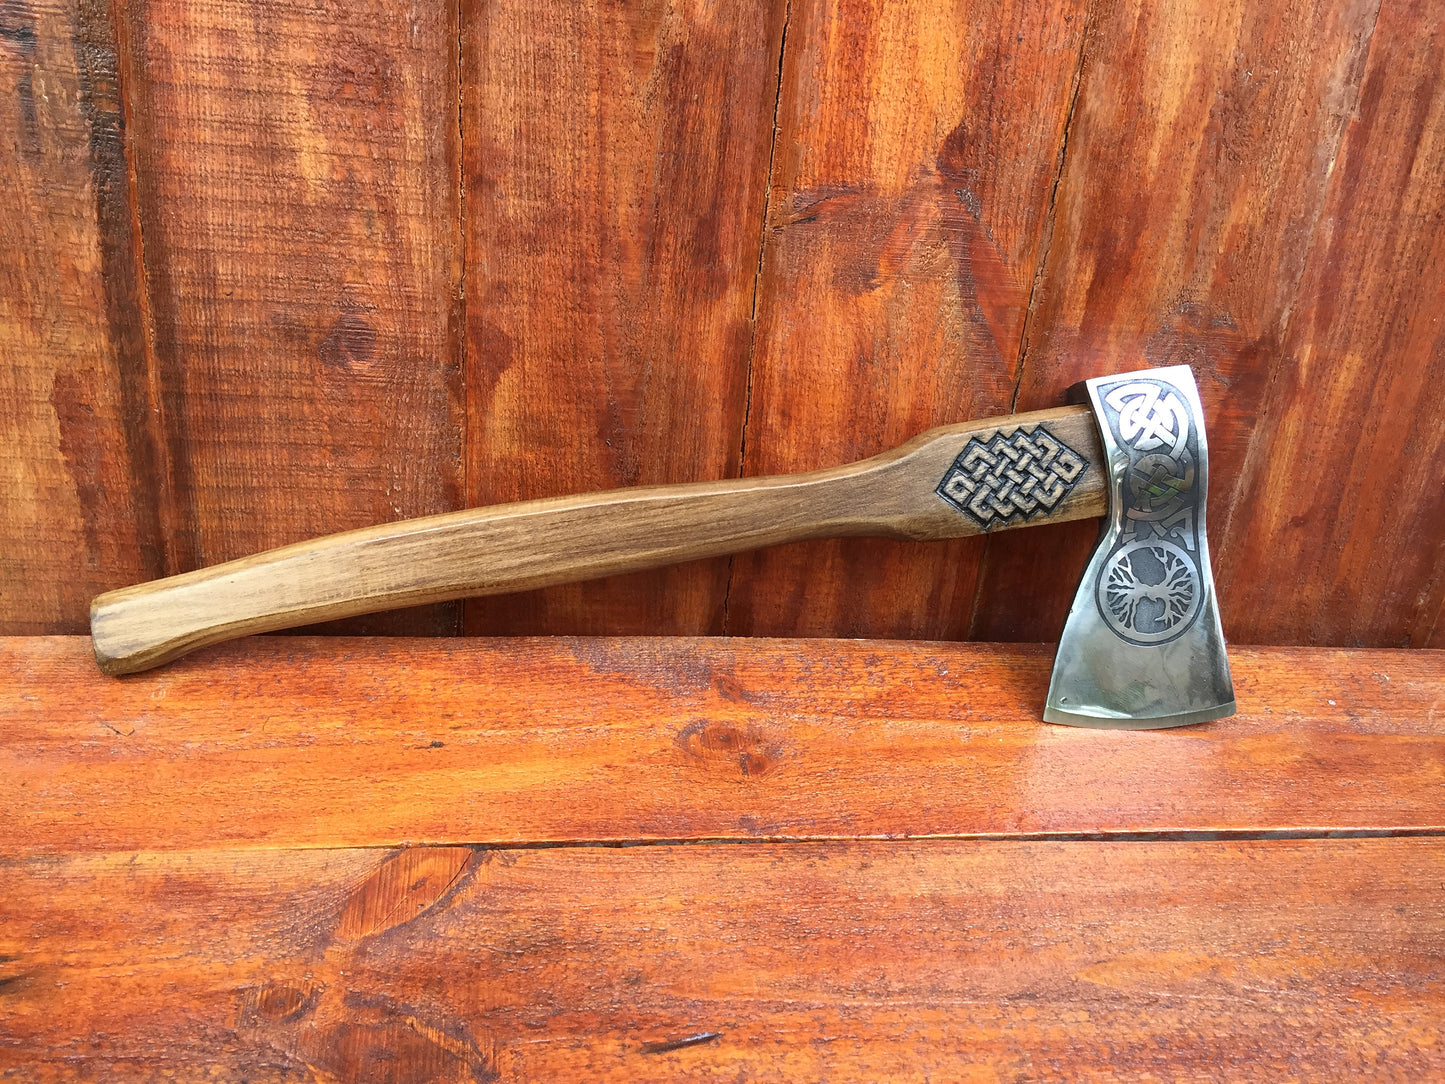 Axe, ax, viking axe, tree of life, medieval axe, kitchen utinsils,tomahawk, mens birthday gift, mens gifts, iron gift for him, gifts for men